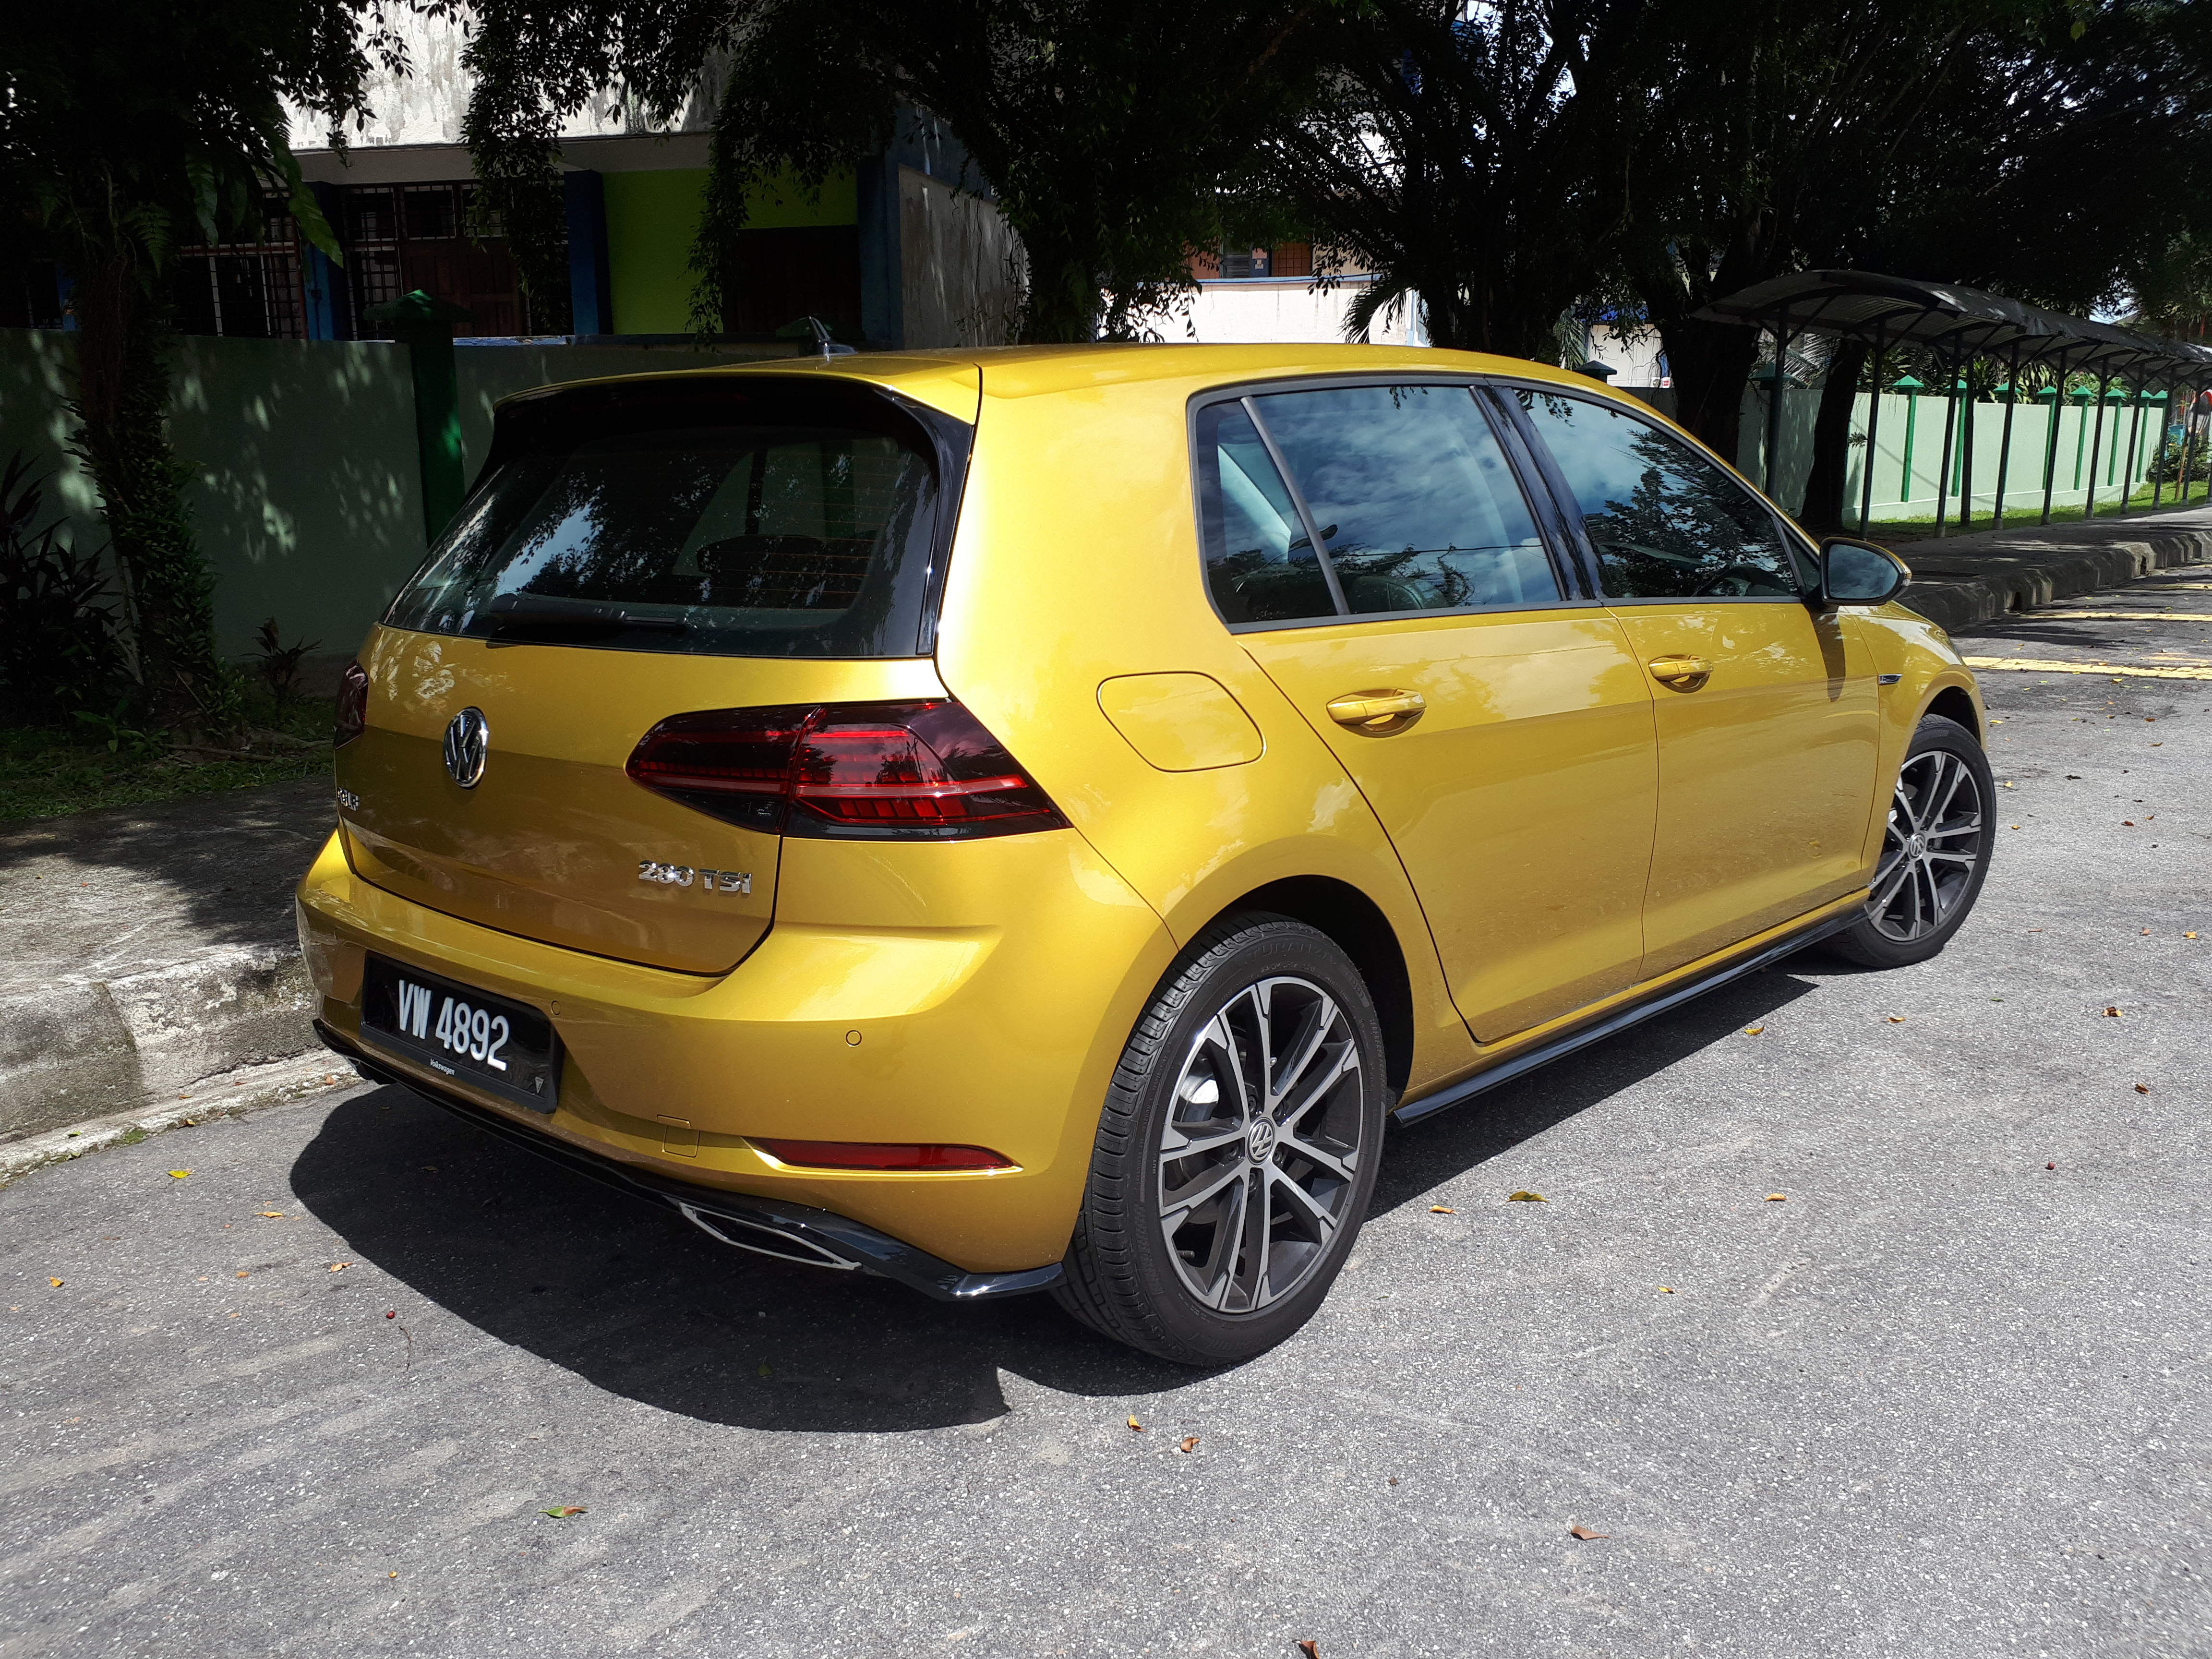 REVIEWED VW Golf 1.4 TSI RLine [+Videos] News and